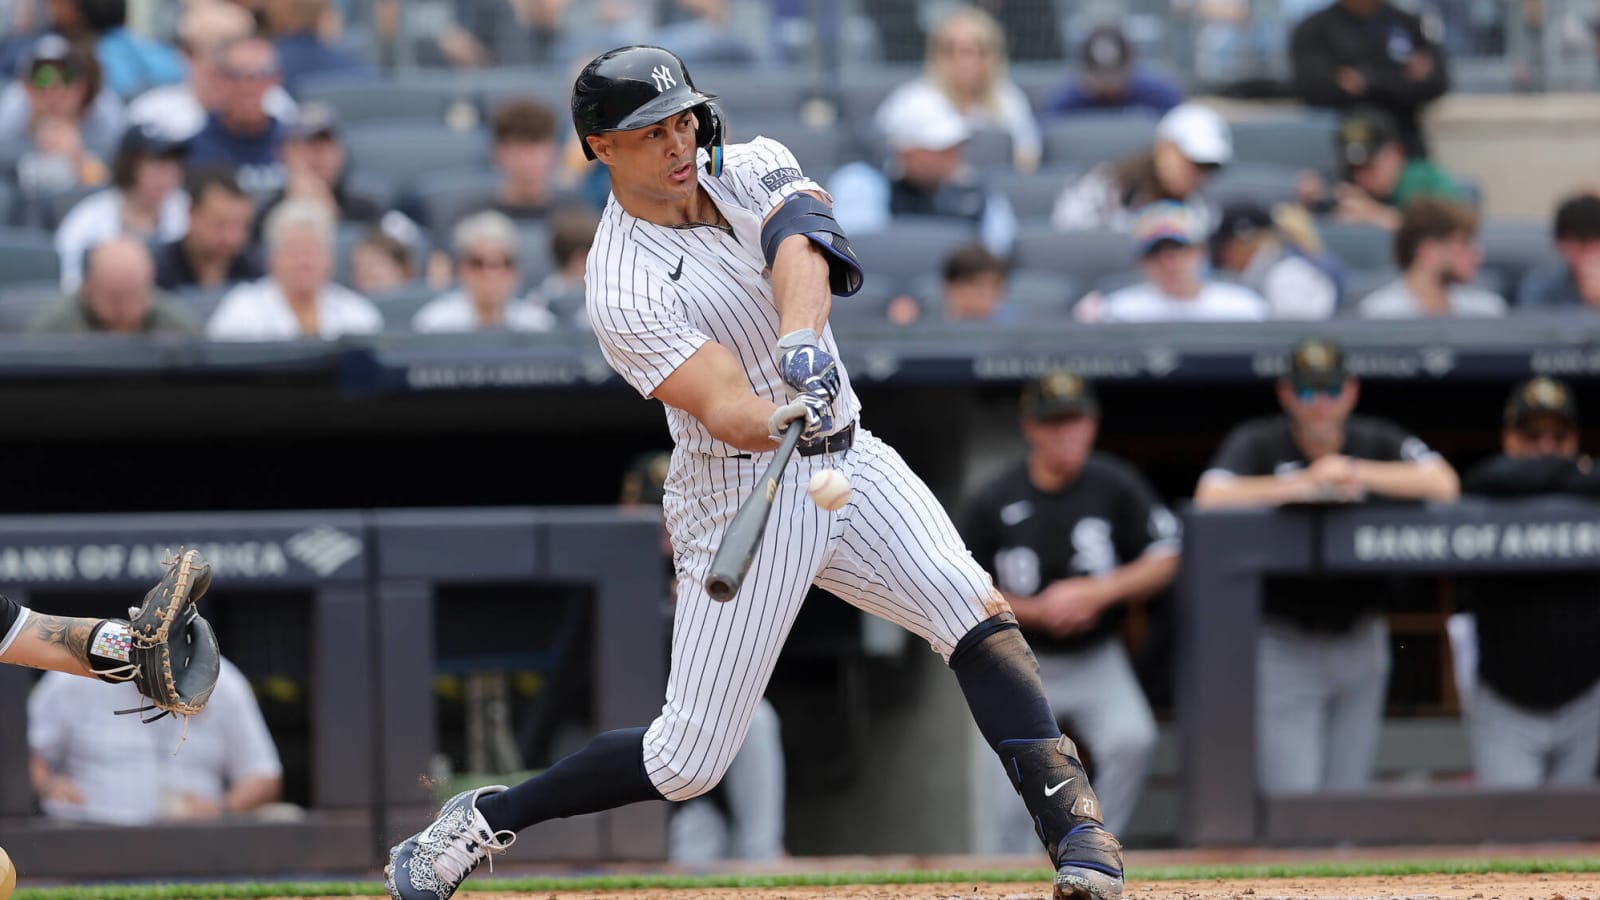 Yankees’ former MVP slugger and All-Star Pitcher rising to the occasion despite criticism